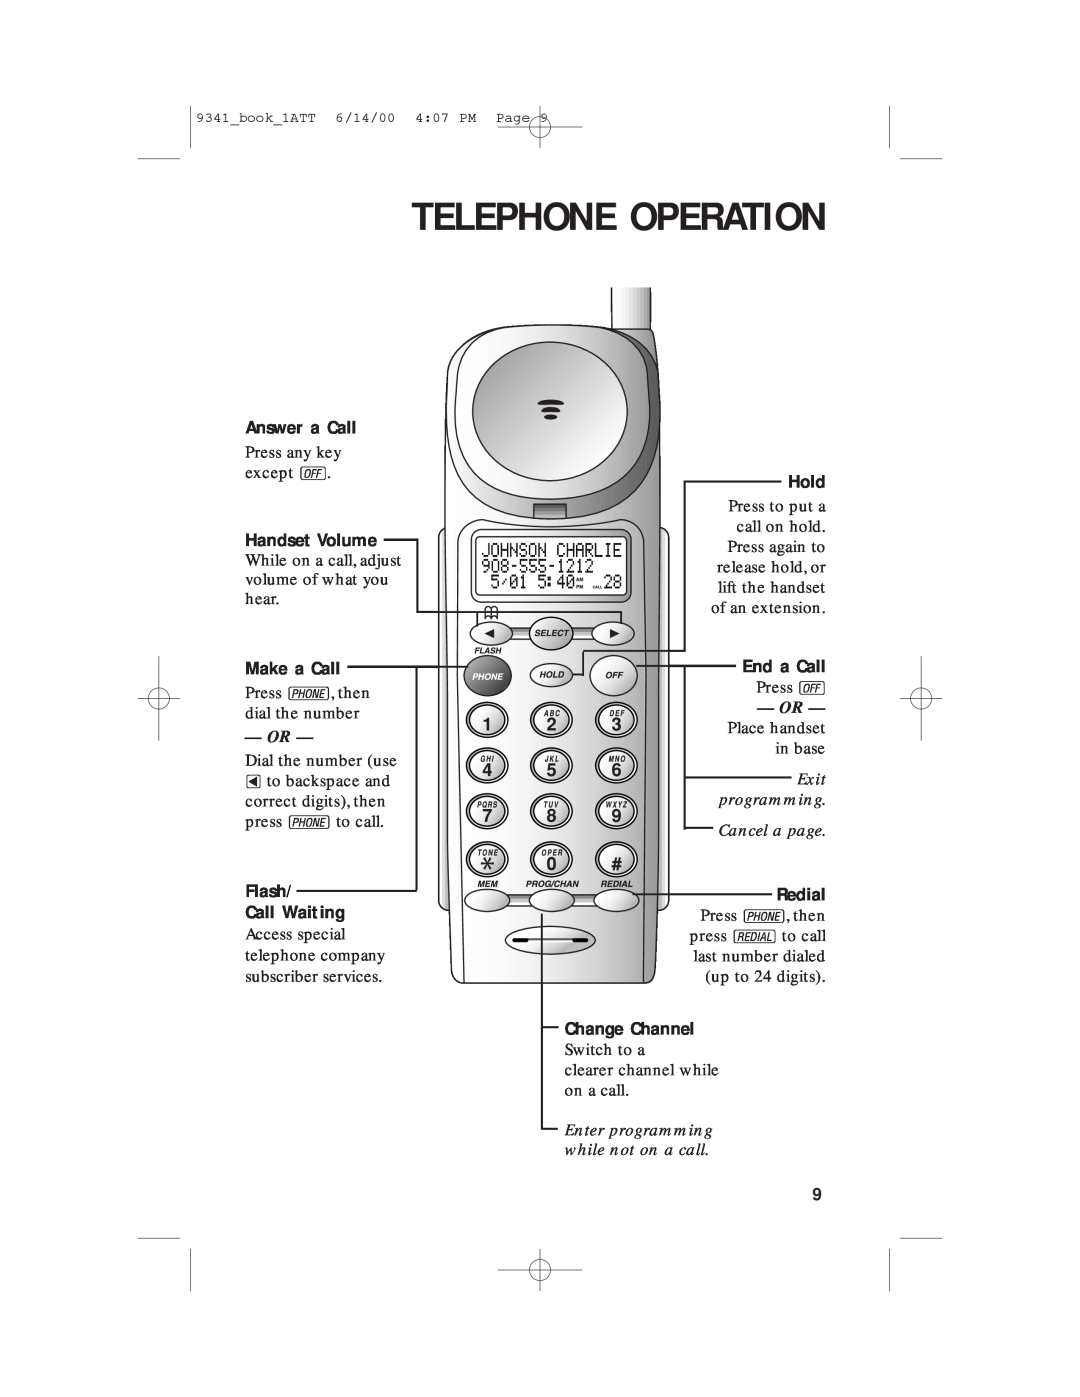 AT&T 9341 Telephone Operation, Answer a Call, Handset Volume, Make a Call, Flash Call Waiting, Hold, End a Call, Redial 